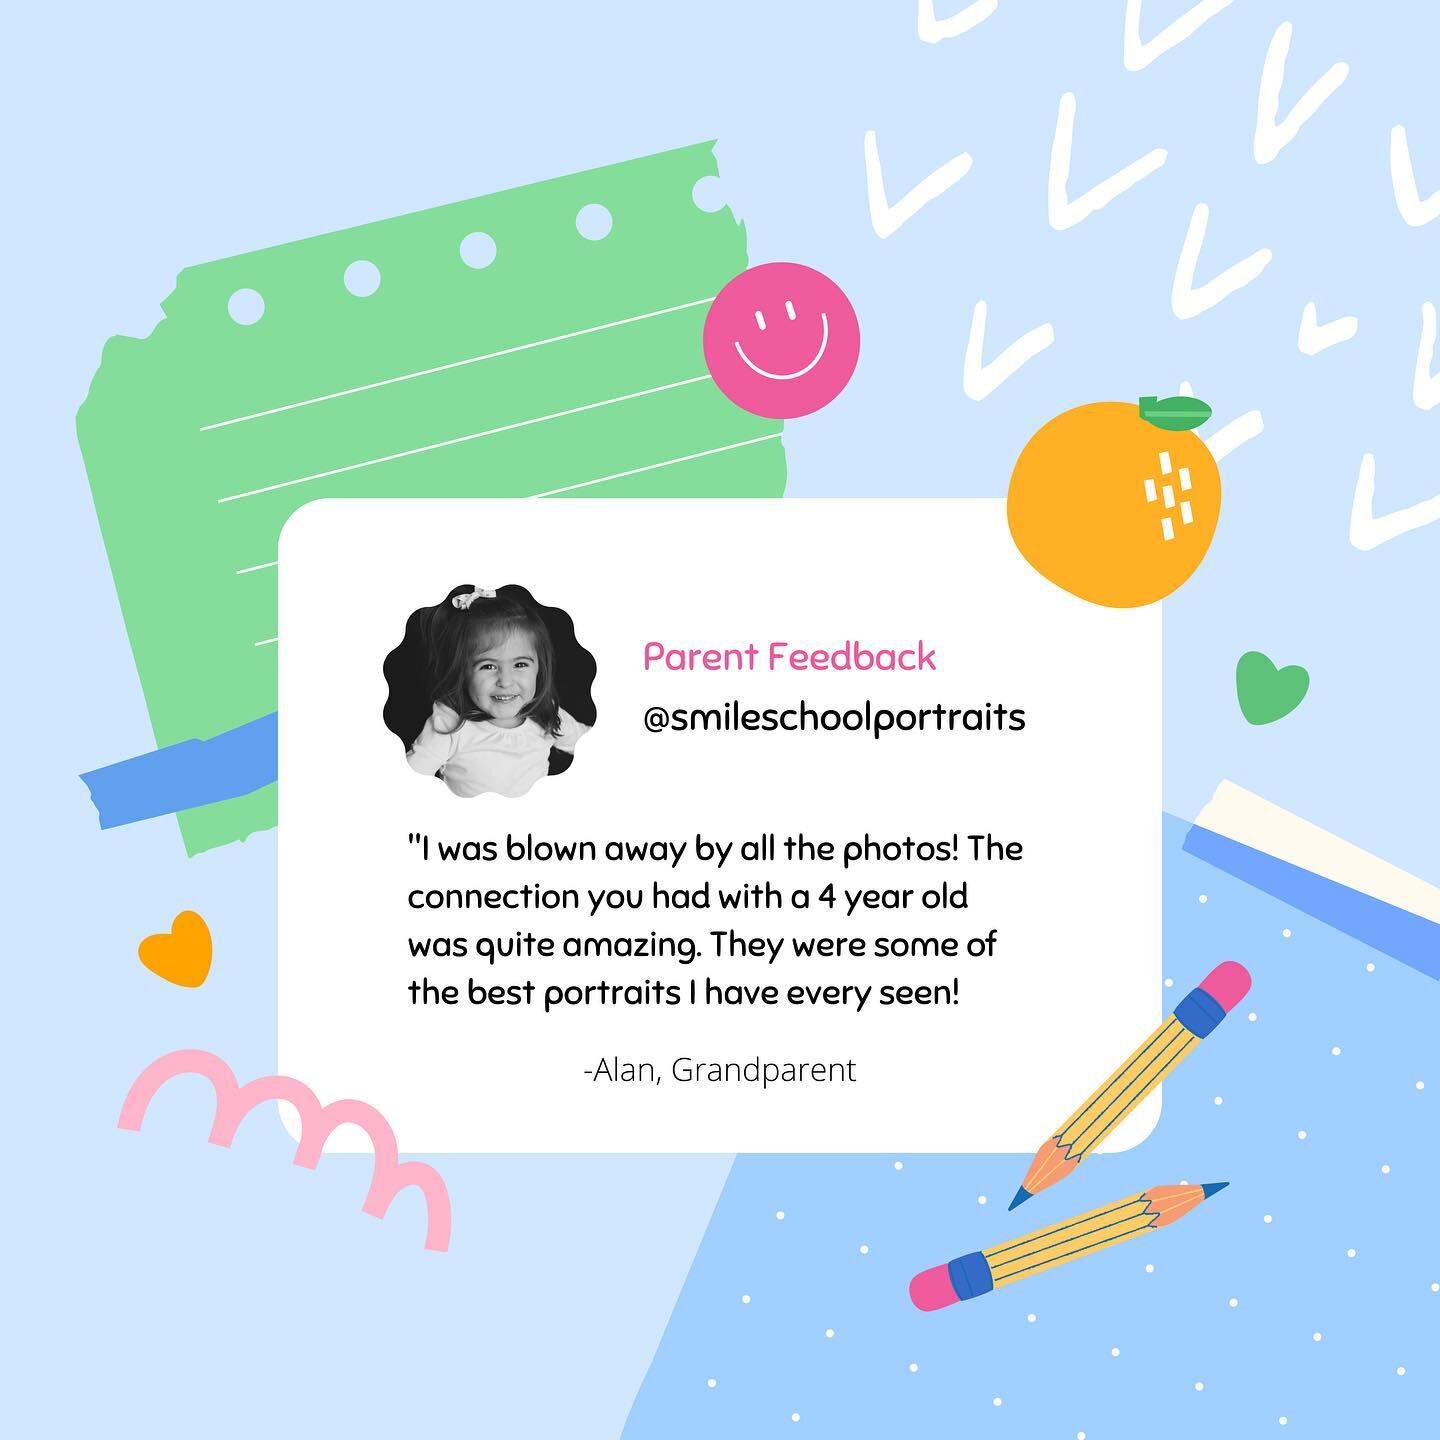 We&rsquo;re not one to brag&hellip;but we LOVE sharing parent feedback with you! This one speaks for itself!
.
Here with @smileschoolportraits we&rsquo;re all about making your child&rsquo;s school photos amazing! 
.
Do you want us to take your child